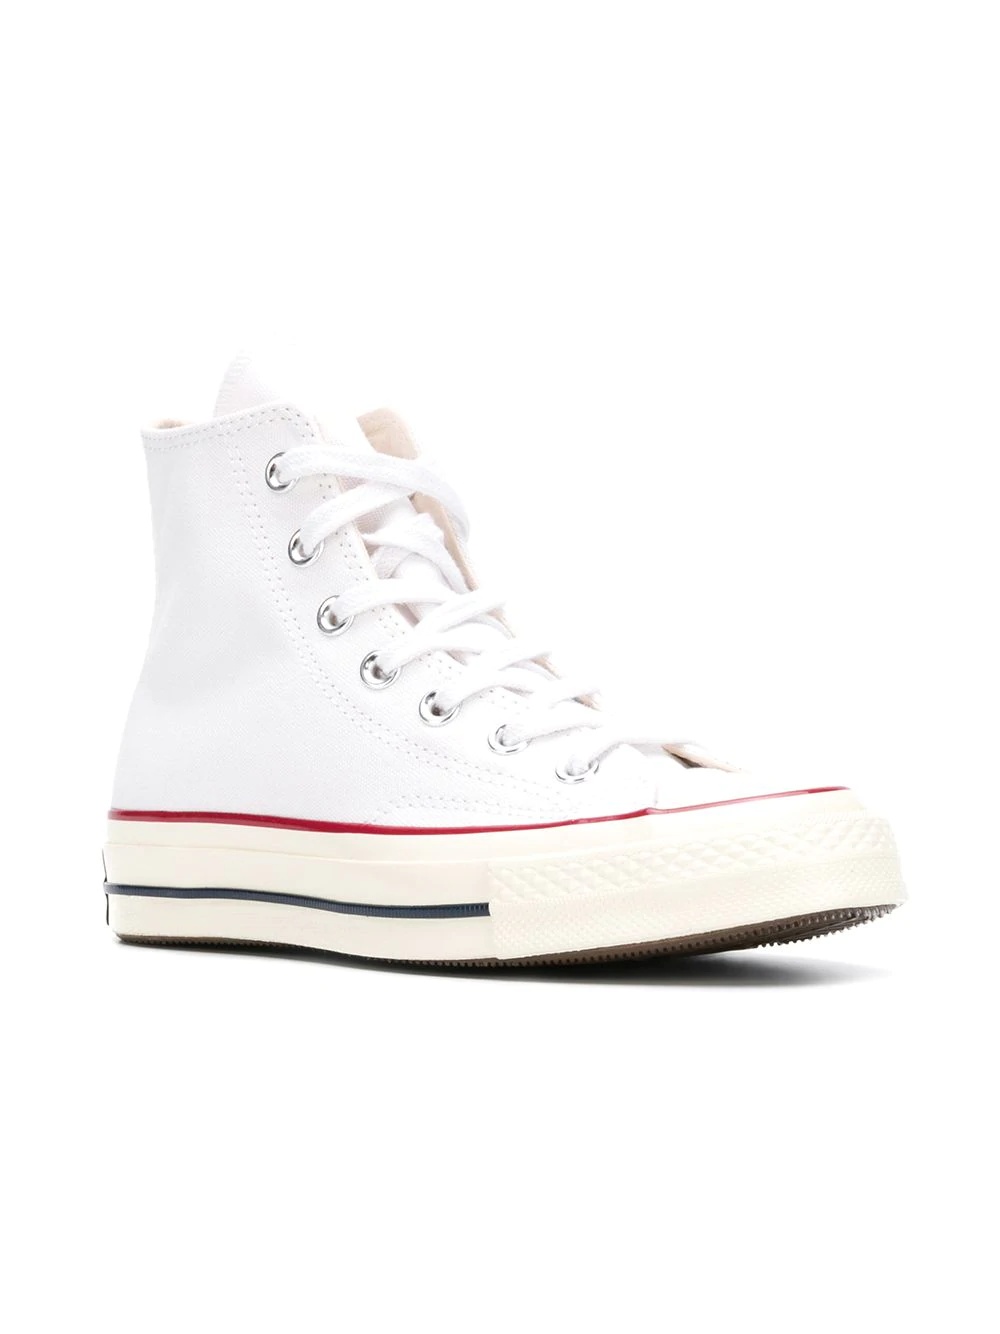 Chuck Taylor All Star 70 High "White" sneakers - 2